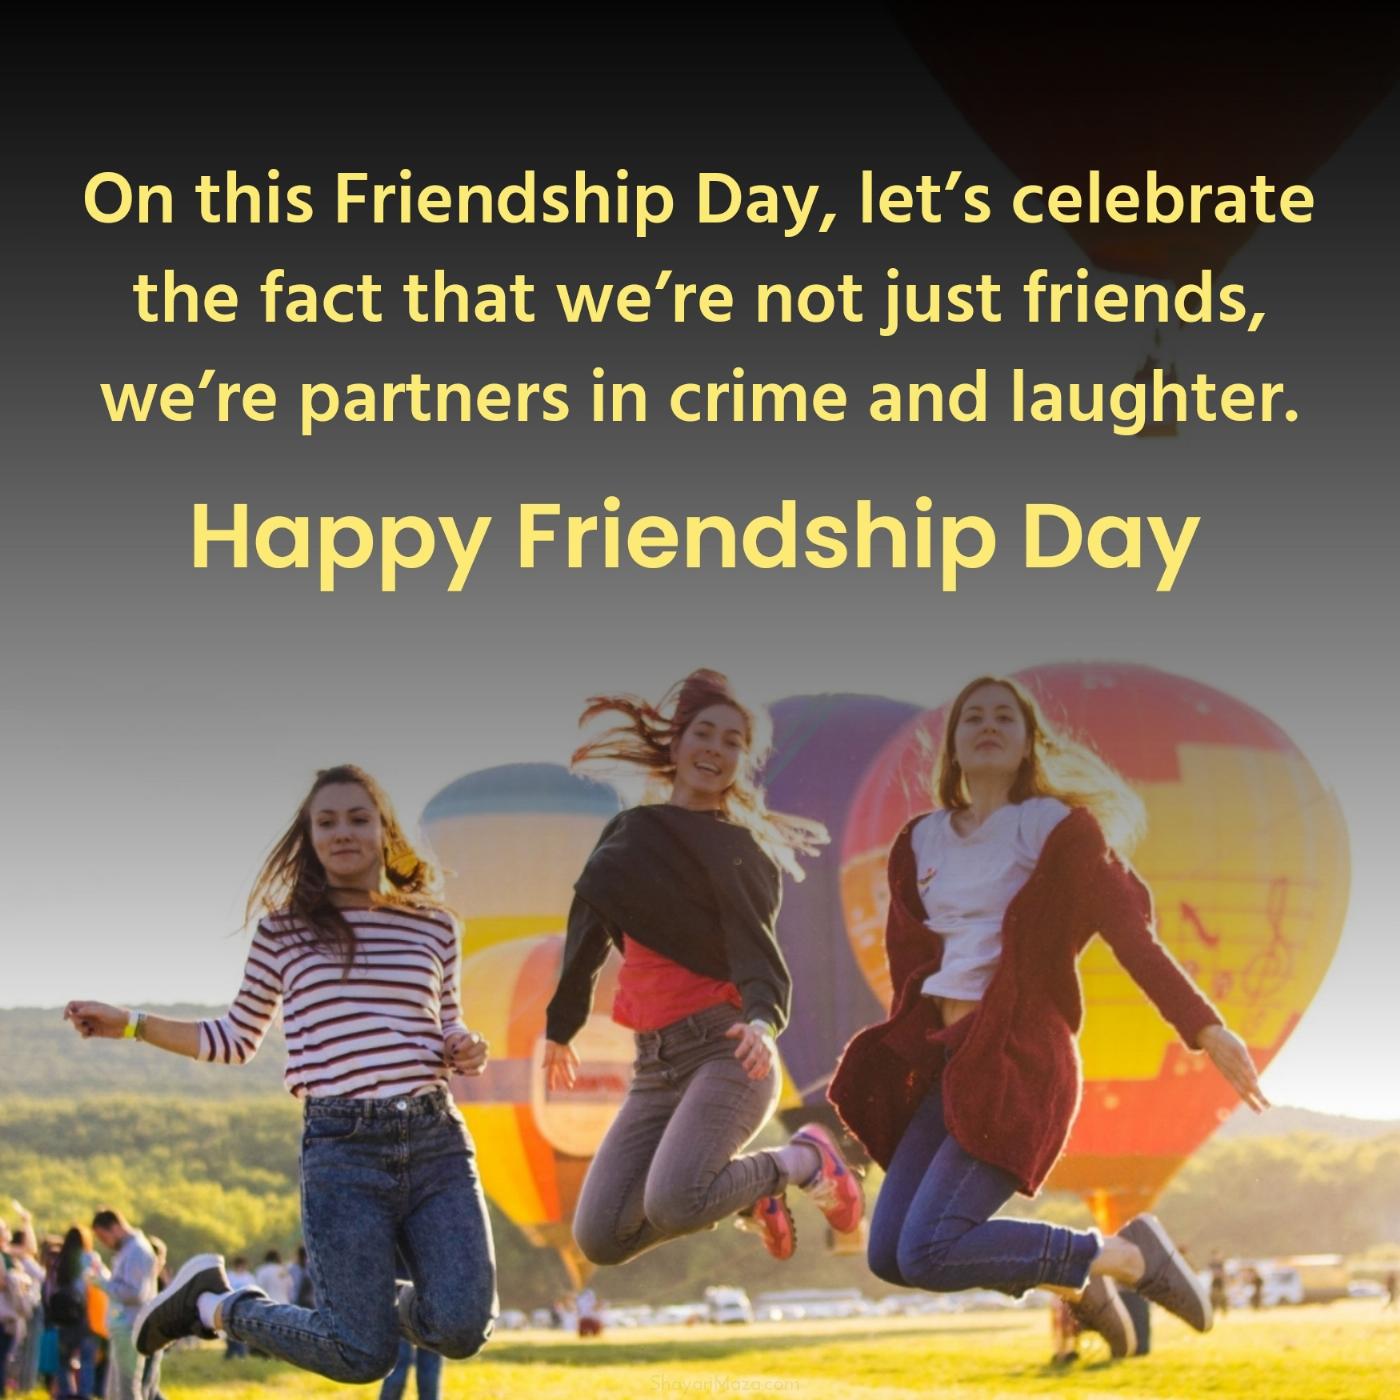 On this Friendship Day lets celebrate the fact that were not just friends